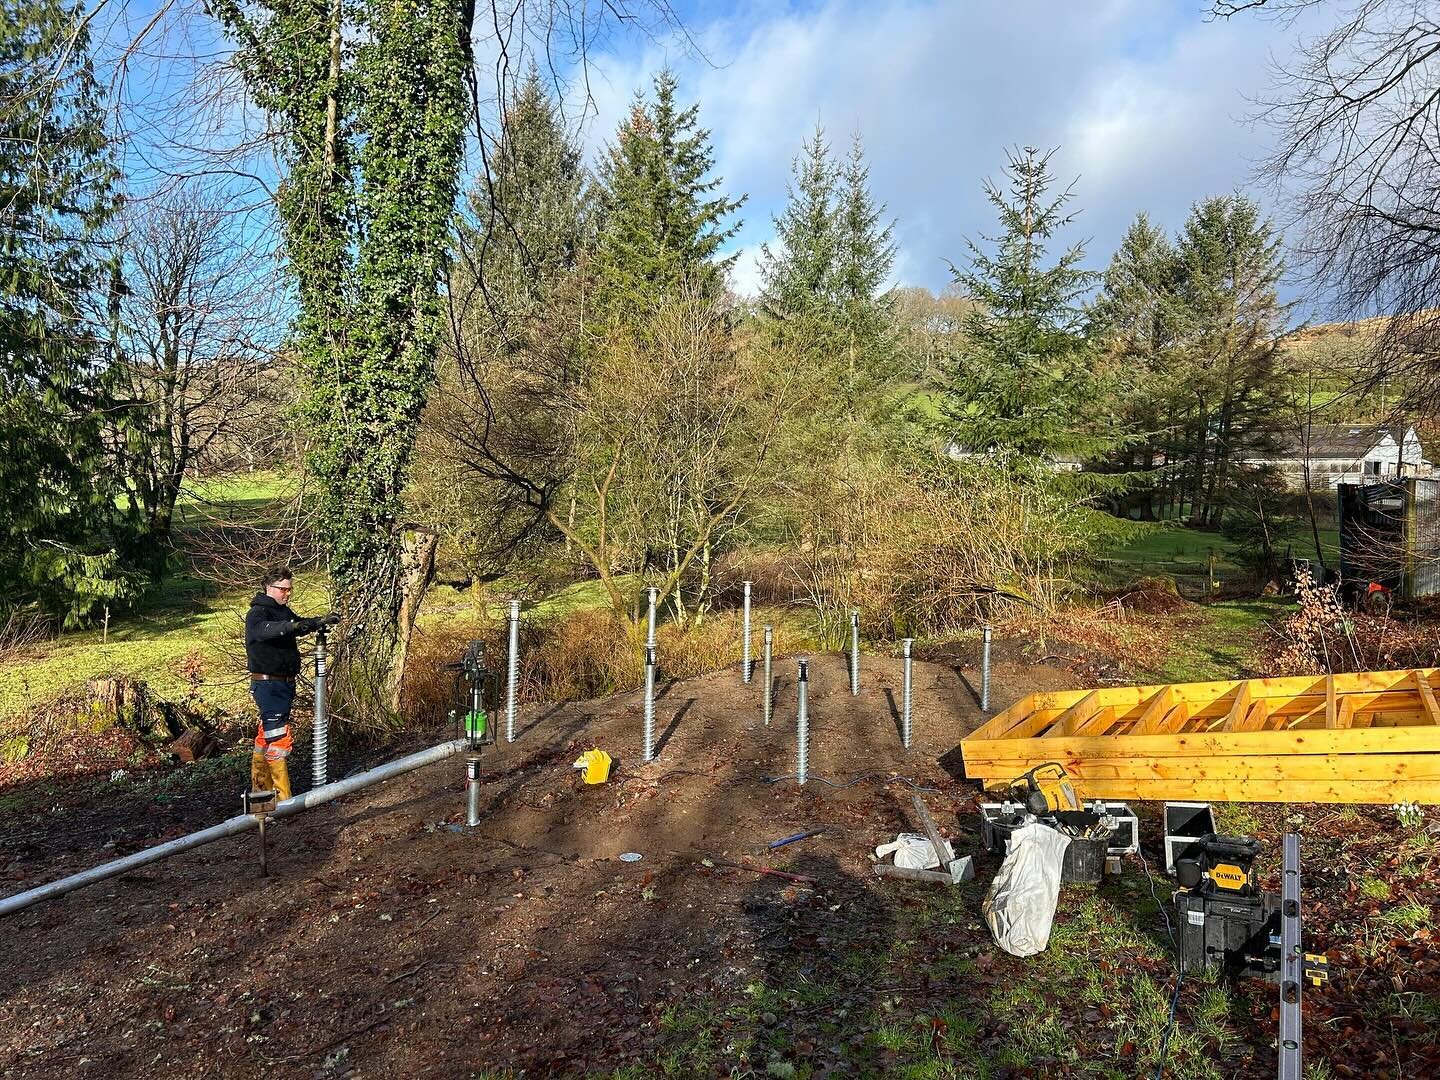 Up in the wonderful #oban today. 14 screws fitted between 1550mm and 1200mm in length. Nice views and smooth fitting! 
All foundations done in just a working day. #groundscrews #groundscrewfoundations #argyll #highlands